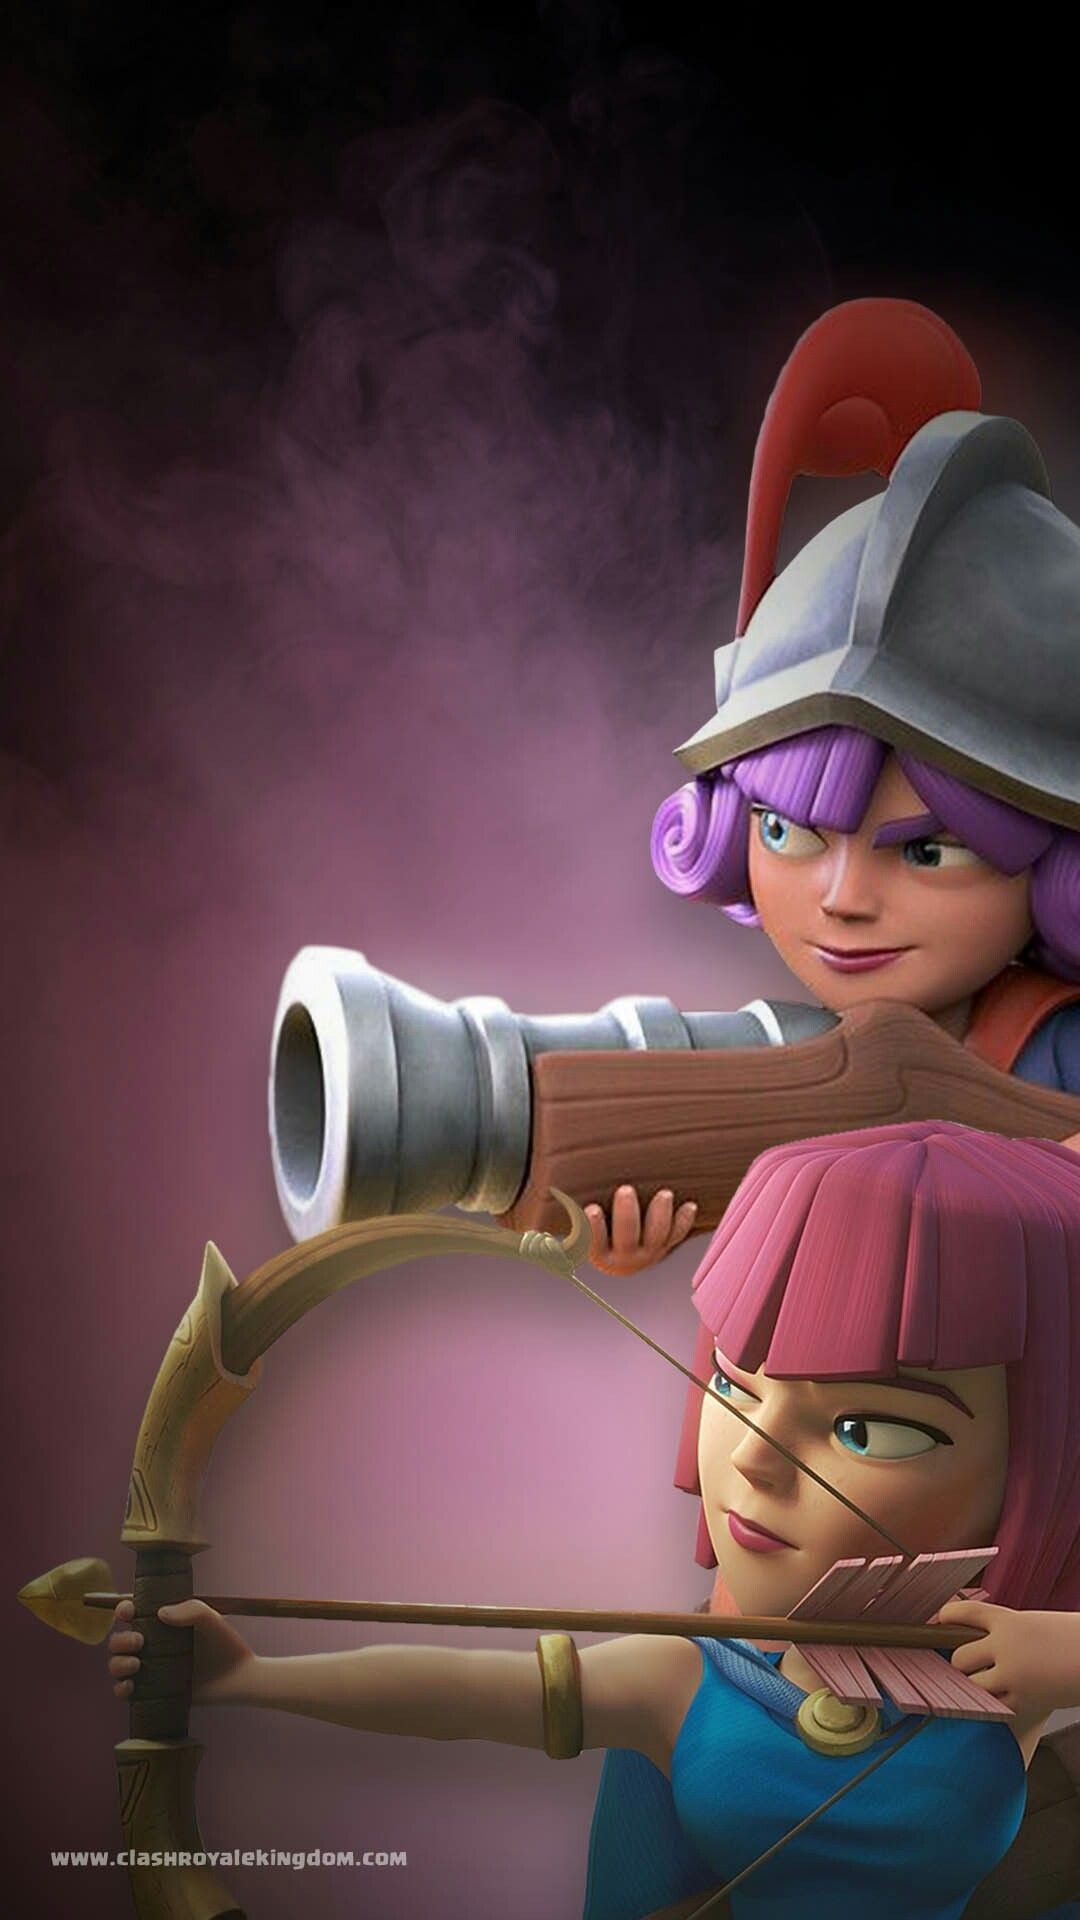 A Shot from the Archer and Musketeer. Clash royale wallpaper, Clash royale, Clash royale memes